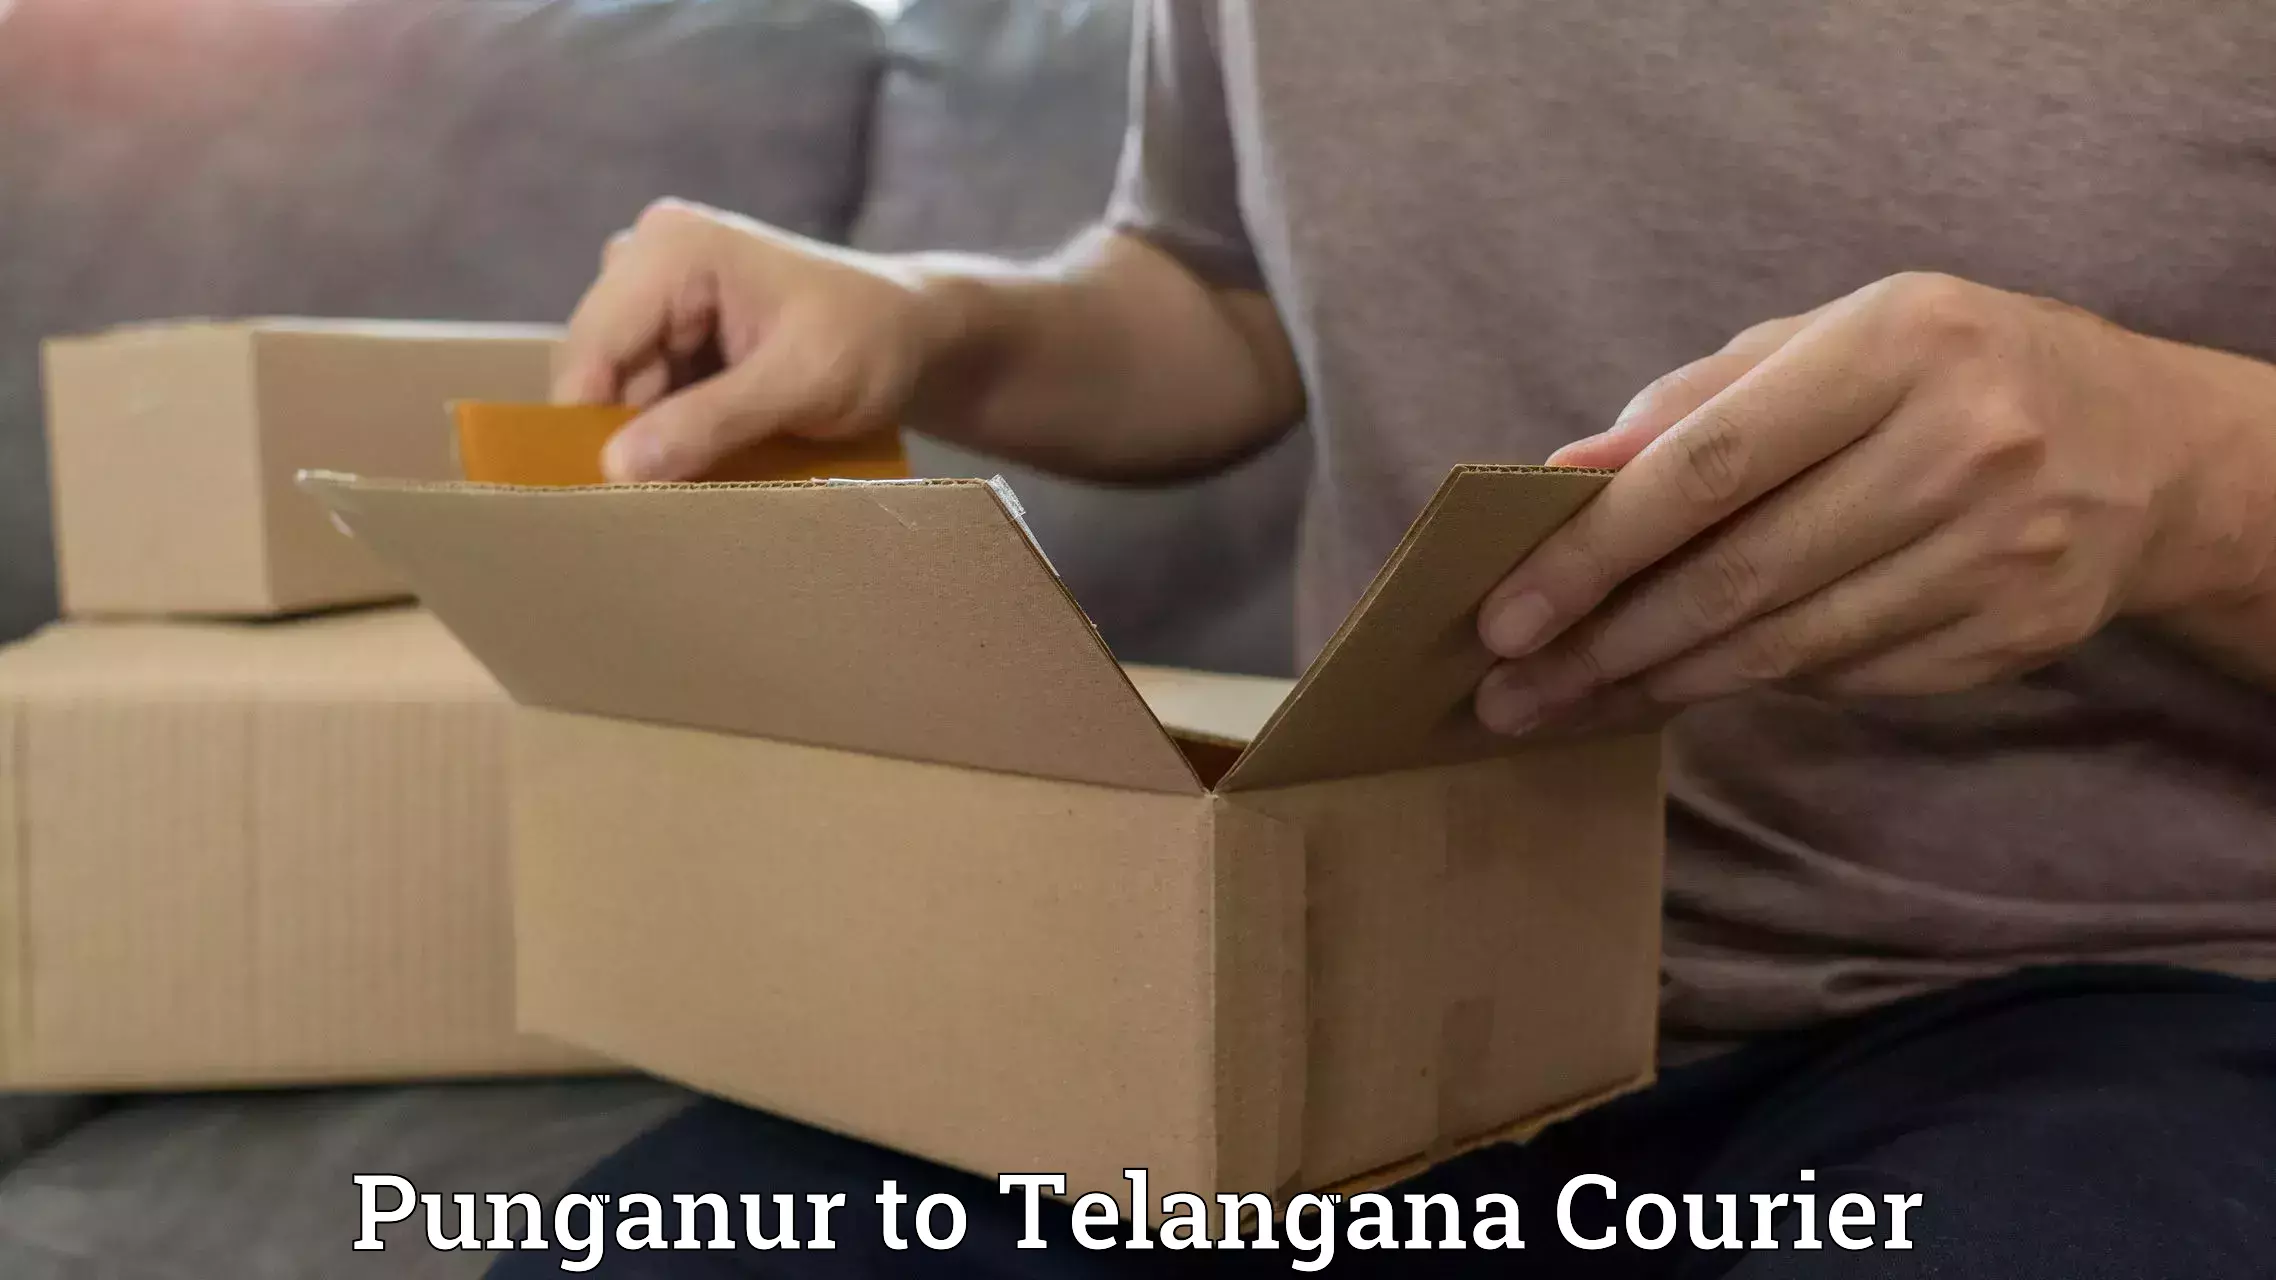 On-call courier service Punganur to Pregnapur